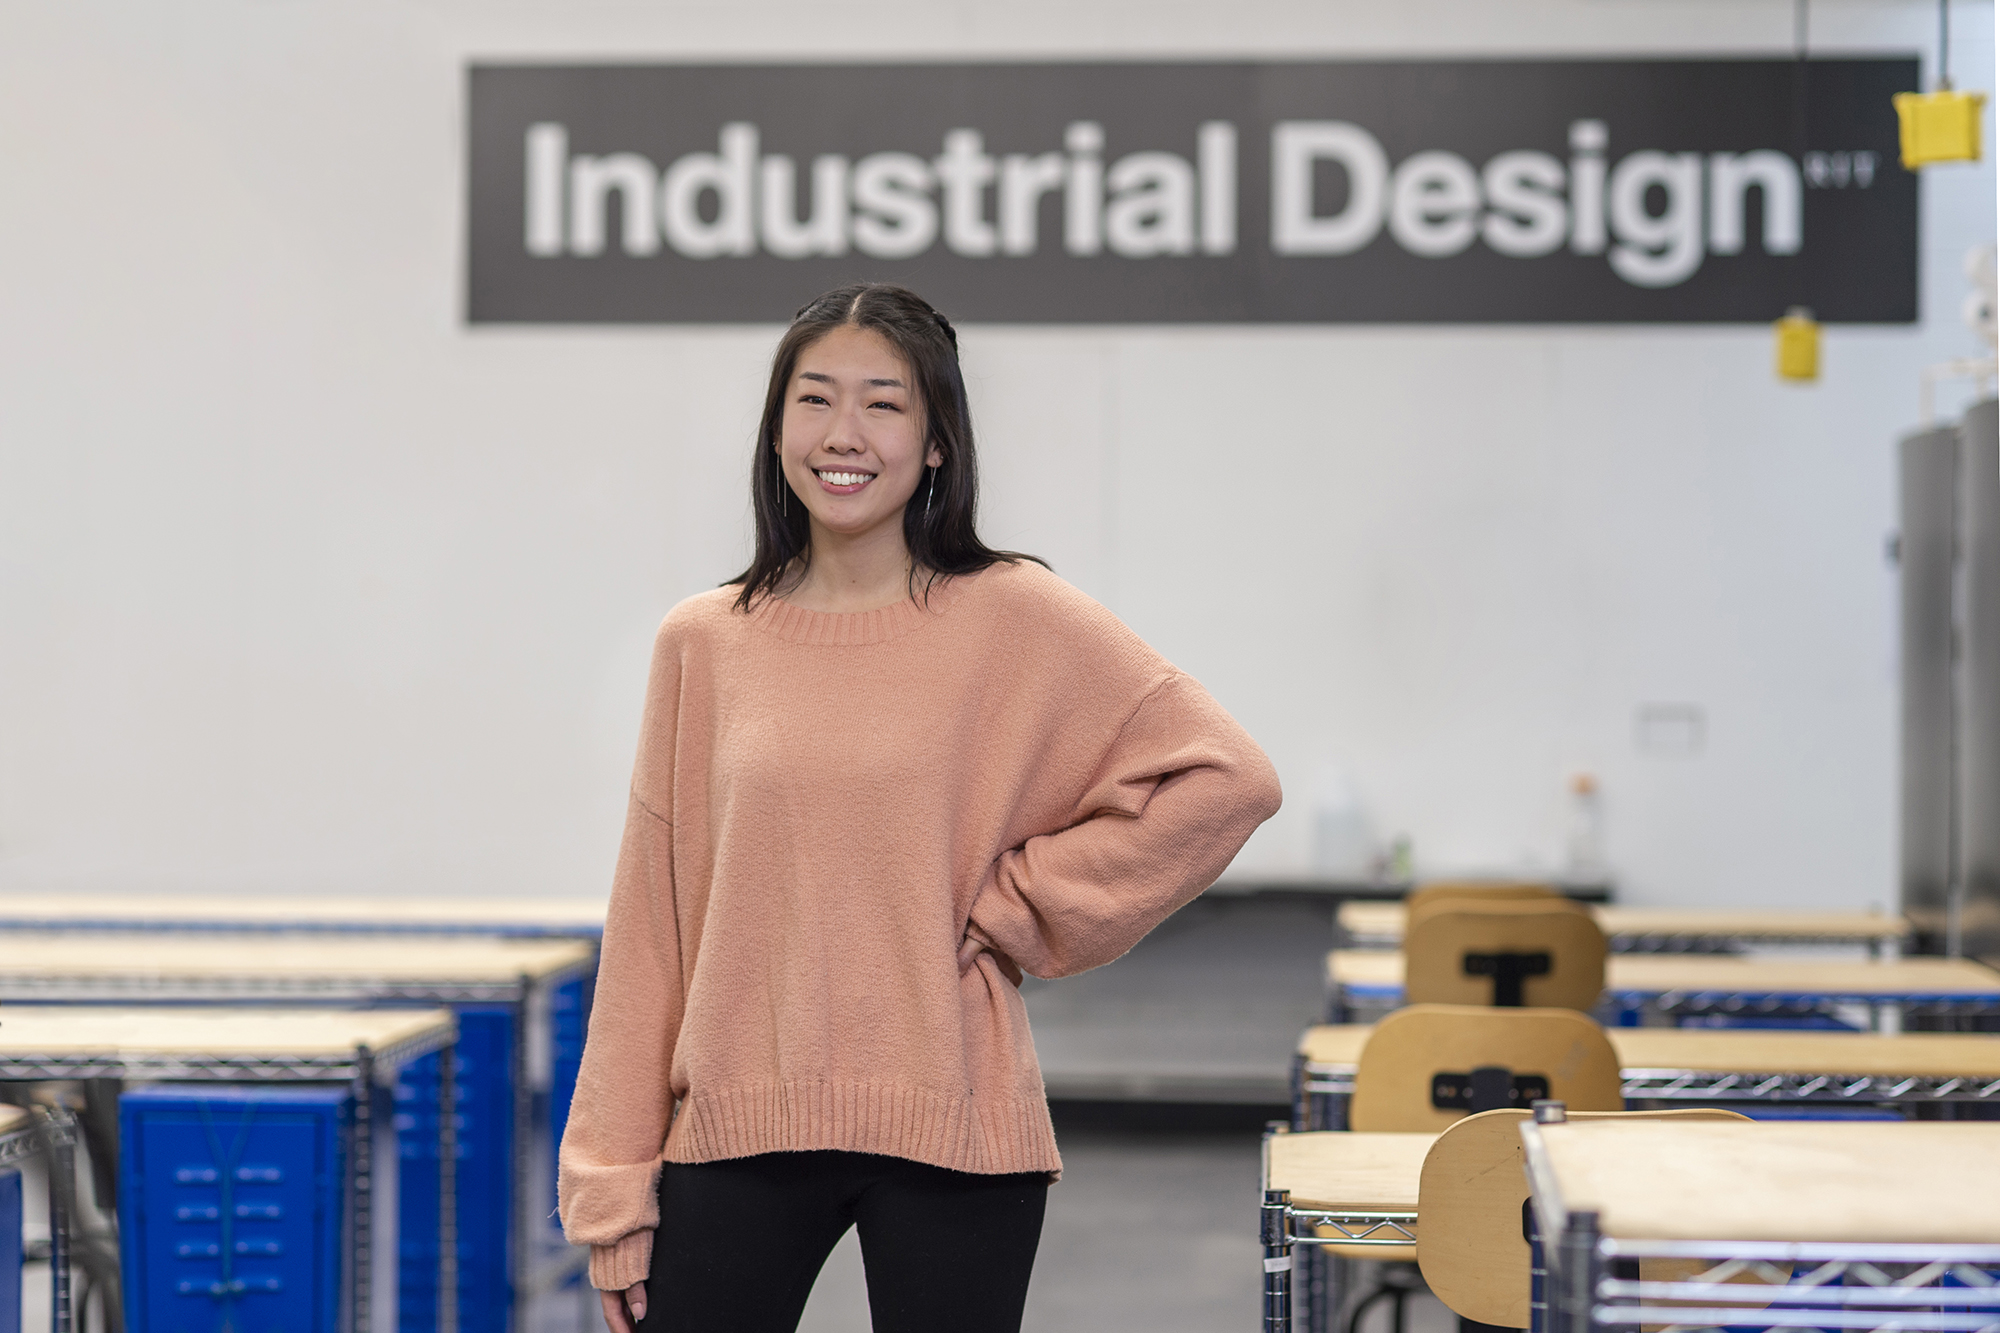 May Ren poses for a portrait in the industrial design studio.